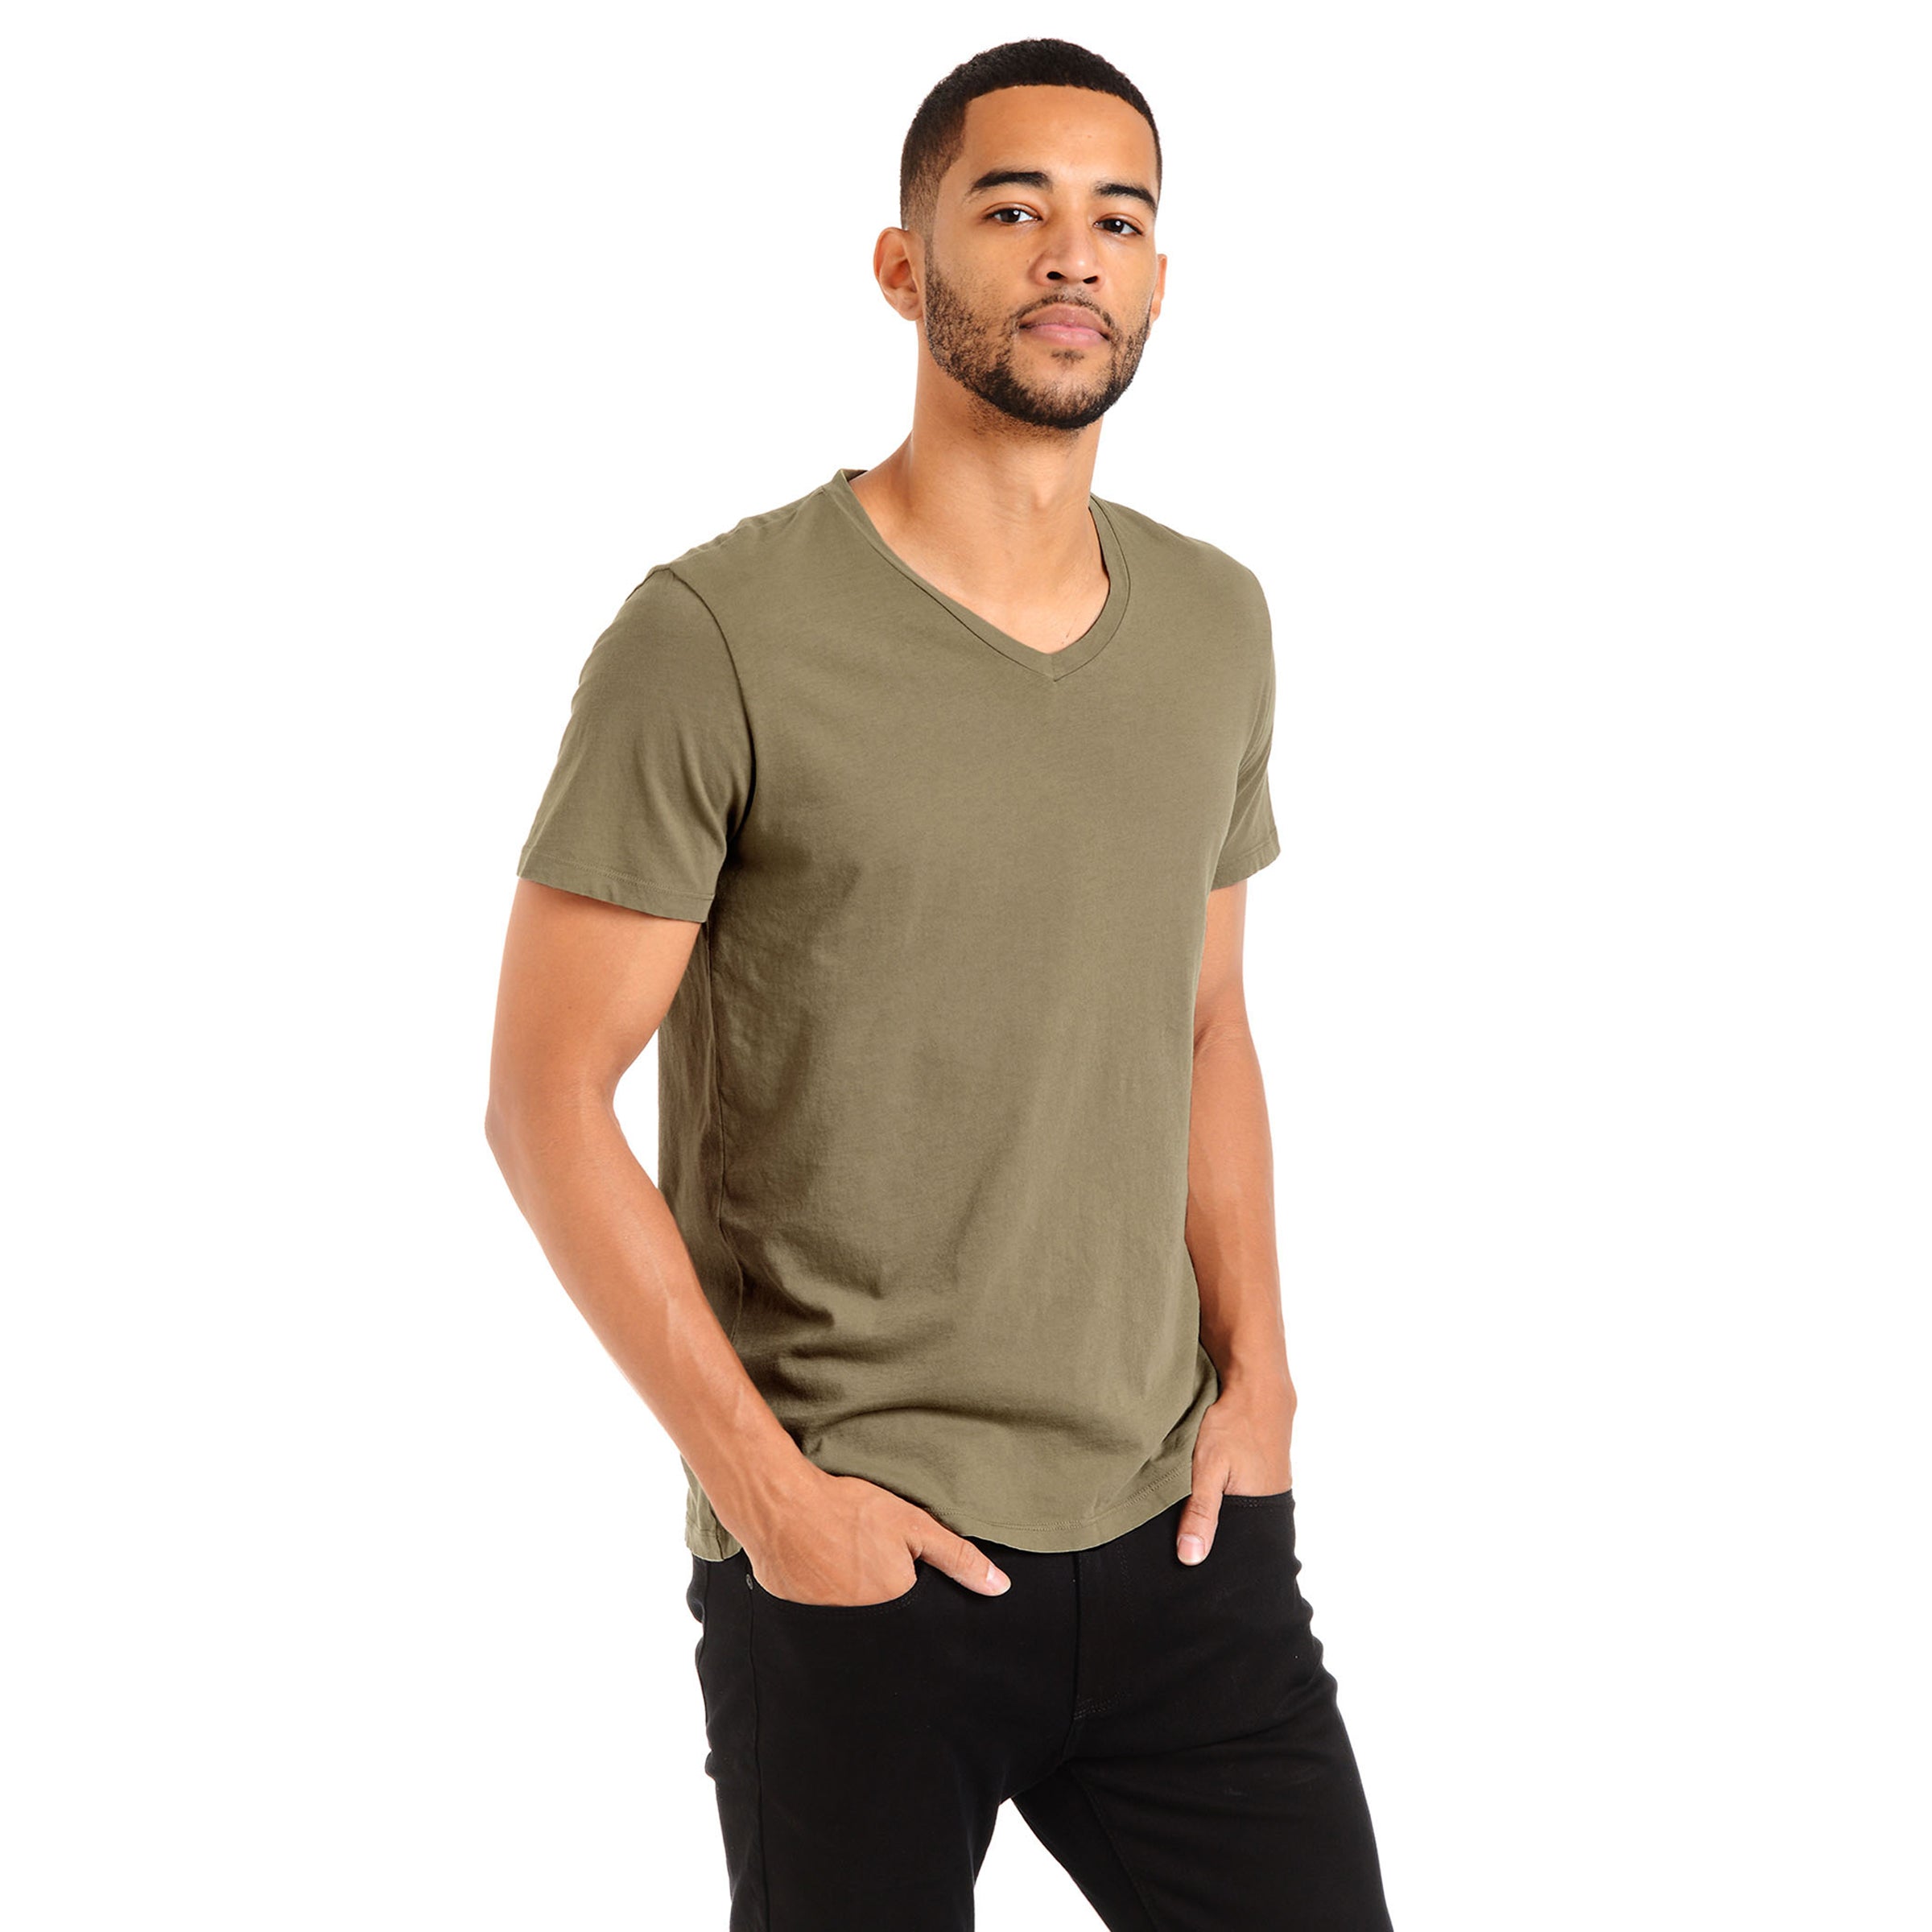 Men wearing Army Green Classic V-Neck Driggs